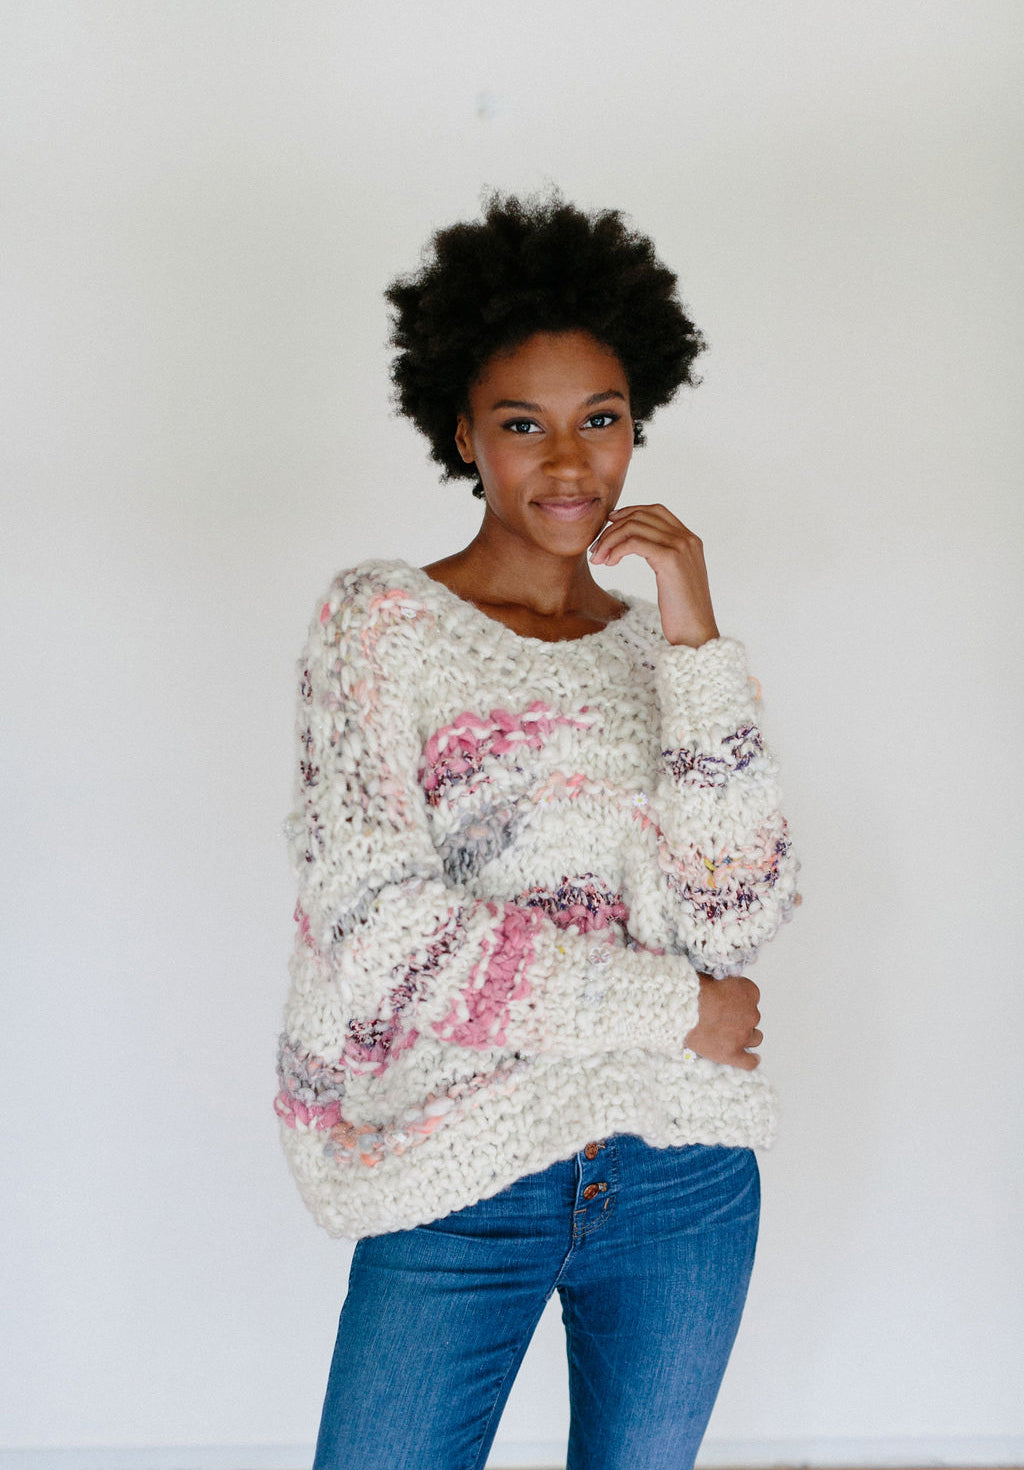 Model with hand on face wearing sweater.